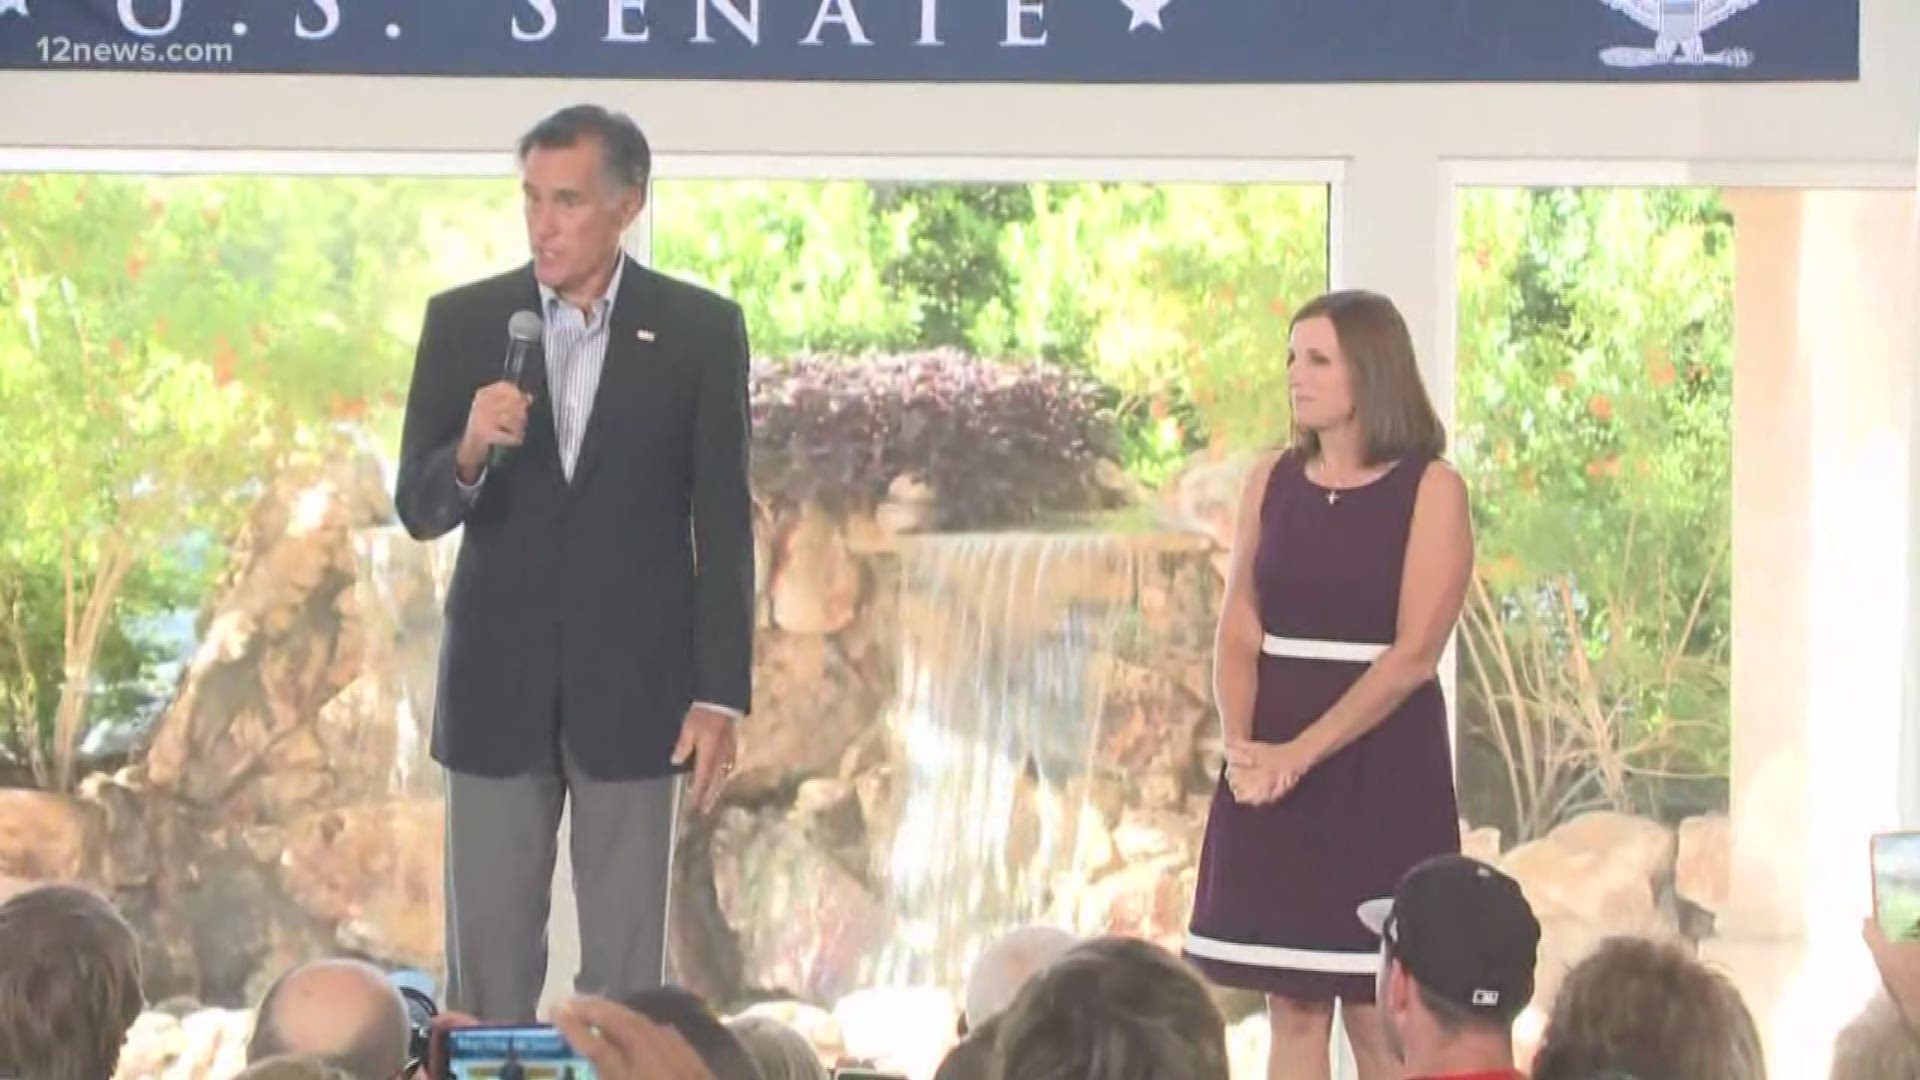 Martha McSally held a rally today urging Republicans to get and out vote. Polls show she is in a dead heat with Democratic challenger, Kyrsten Sinema. McSally even brought out Mitt Romney to help spread the word.